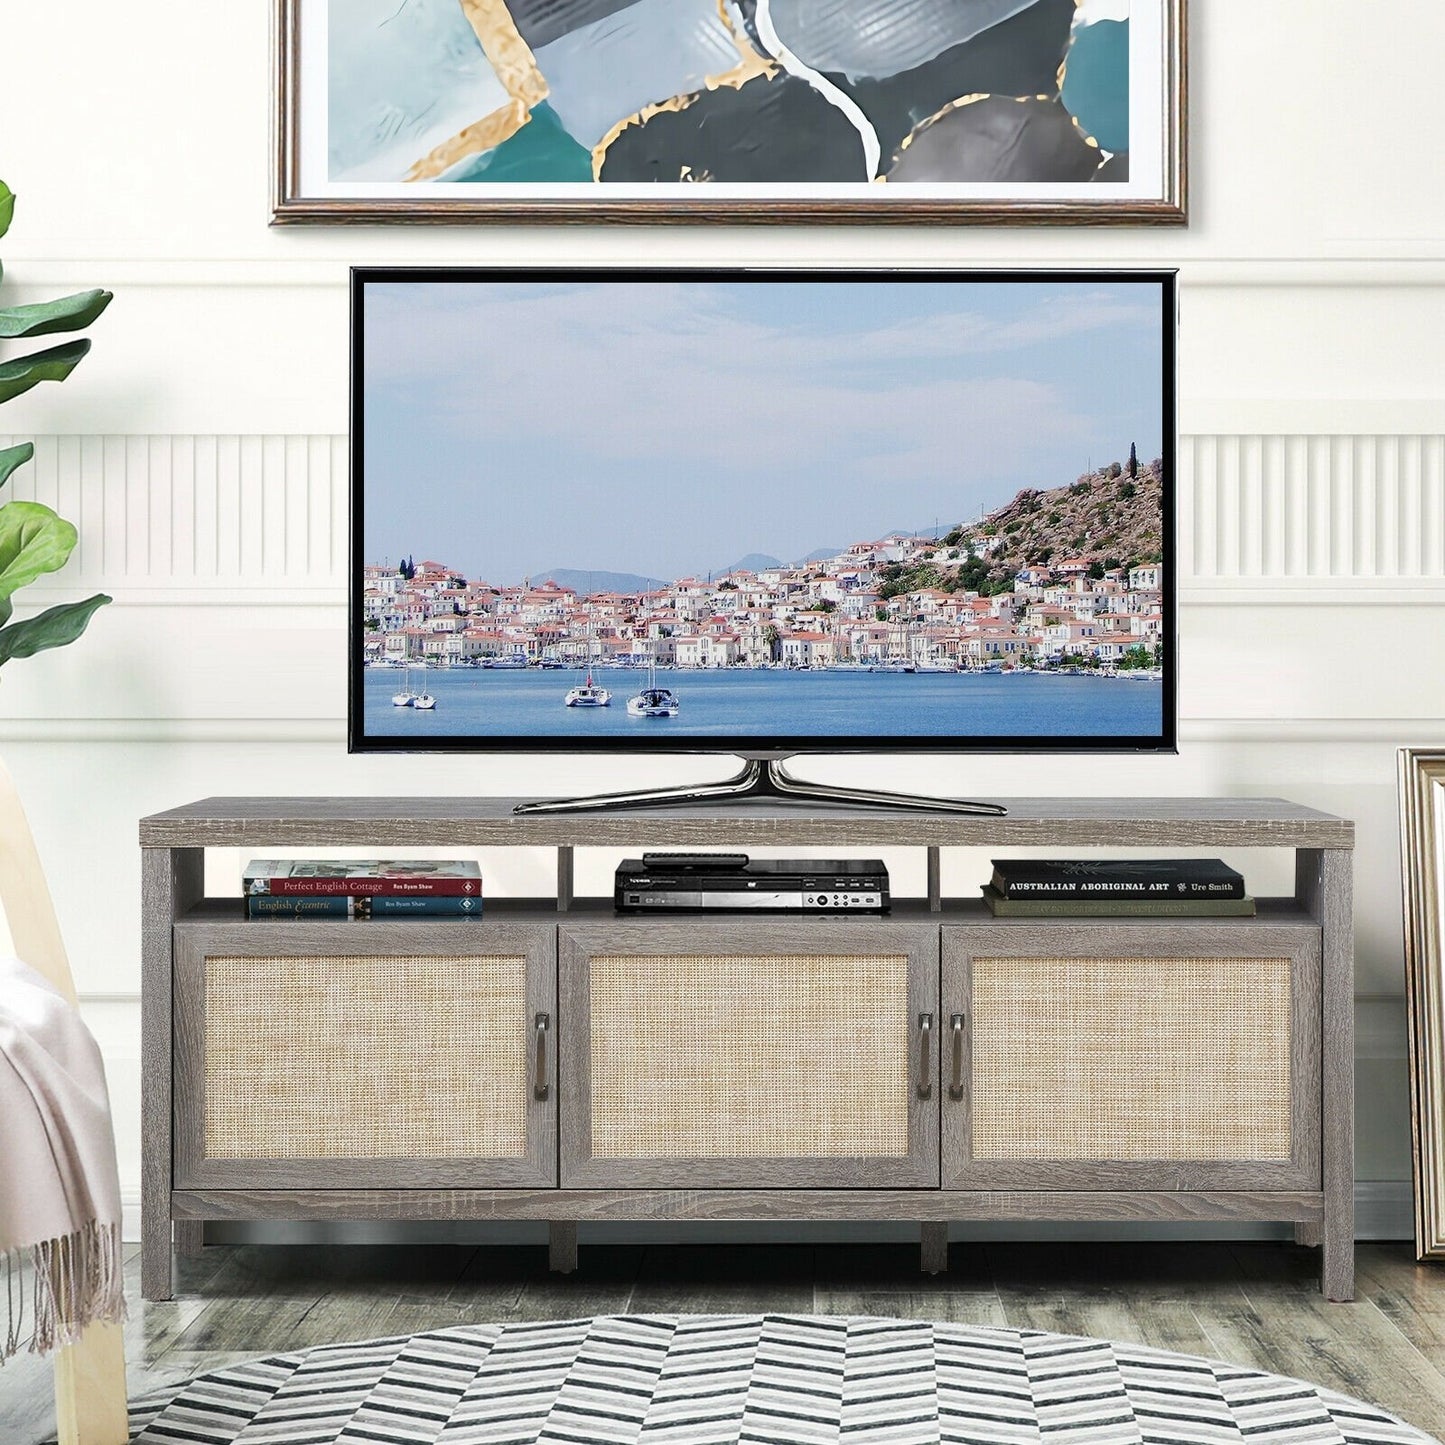 Universal TV Stand Entertainment Media Center for TV's up to 65 Inch, Gray